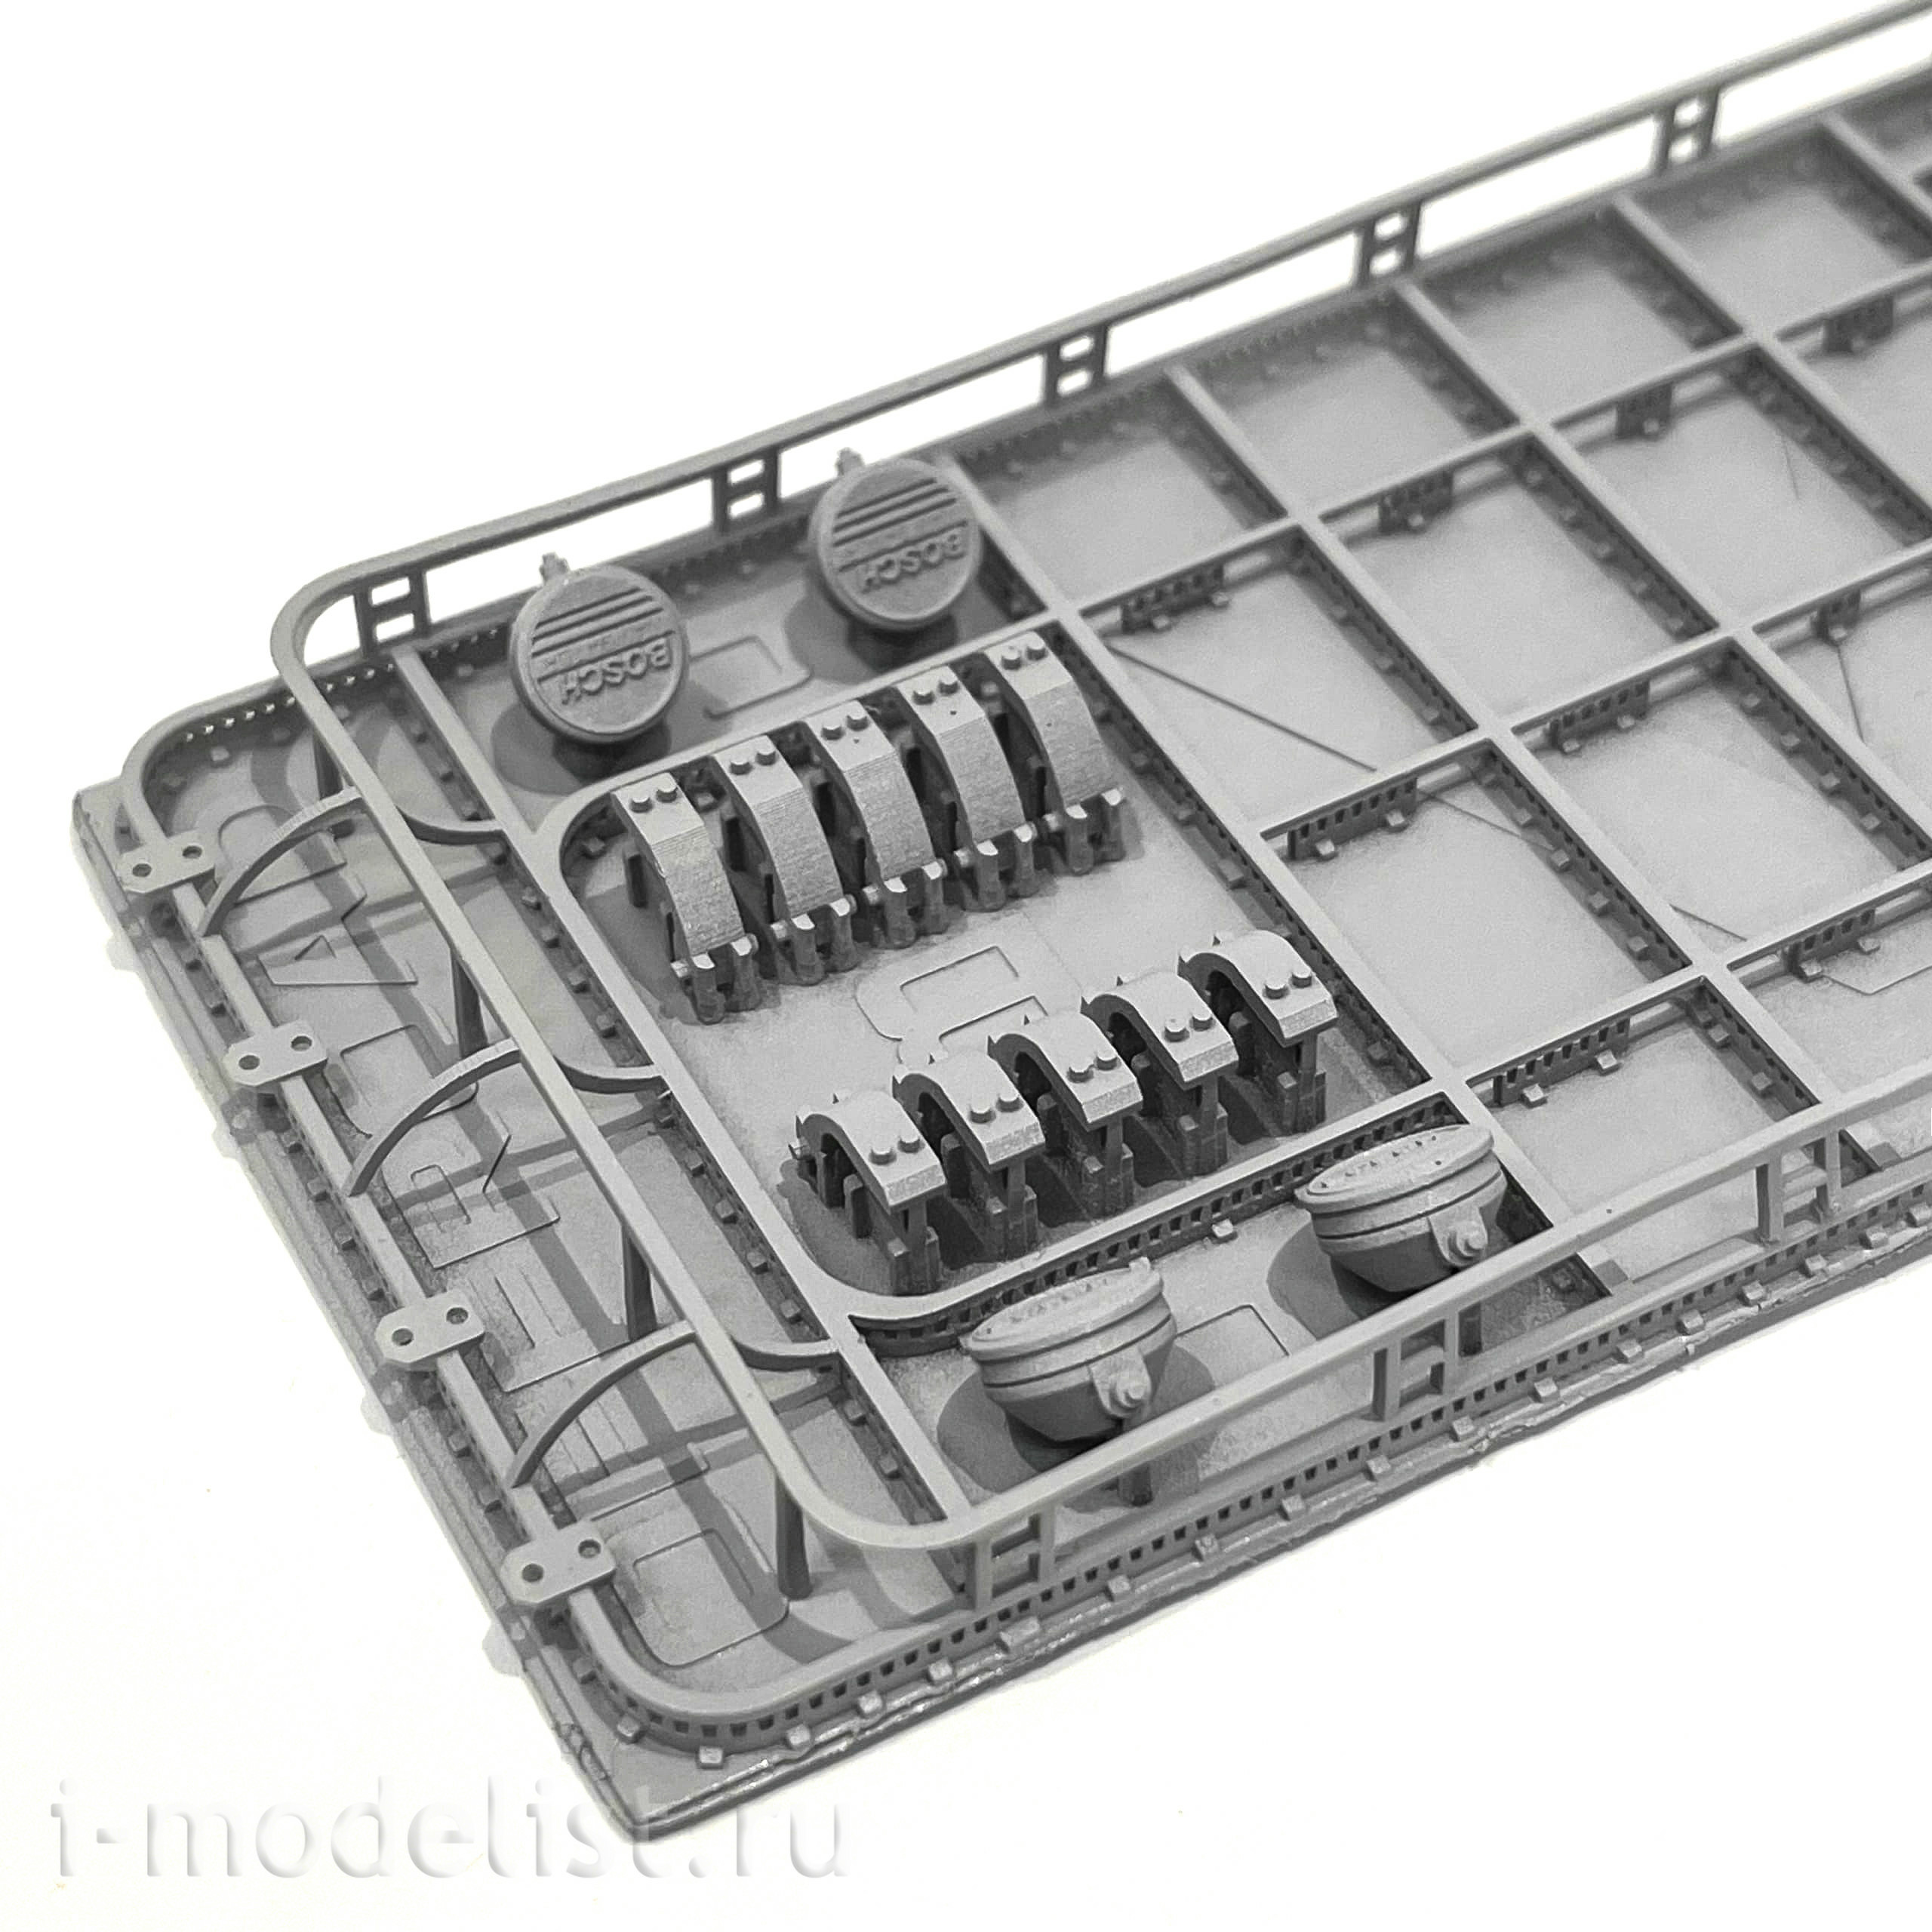 Im35049 Imodelist 1/35 Trunk for the off-road version for 